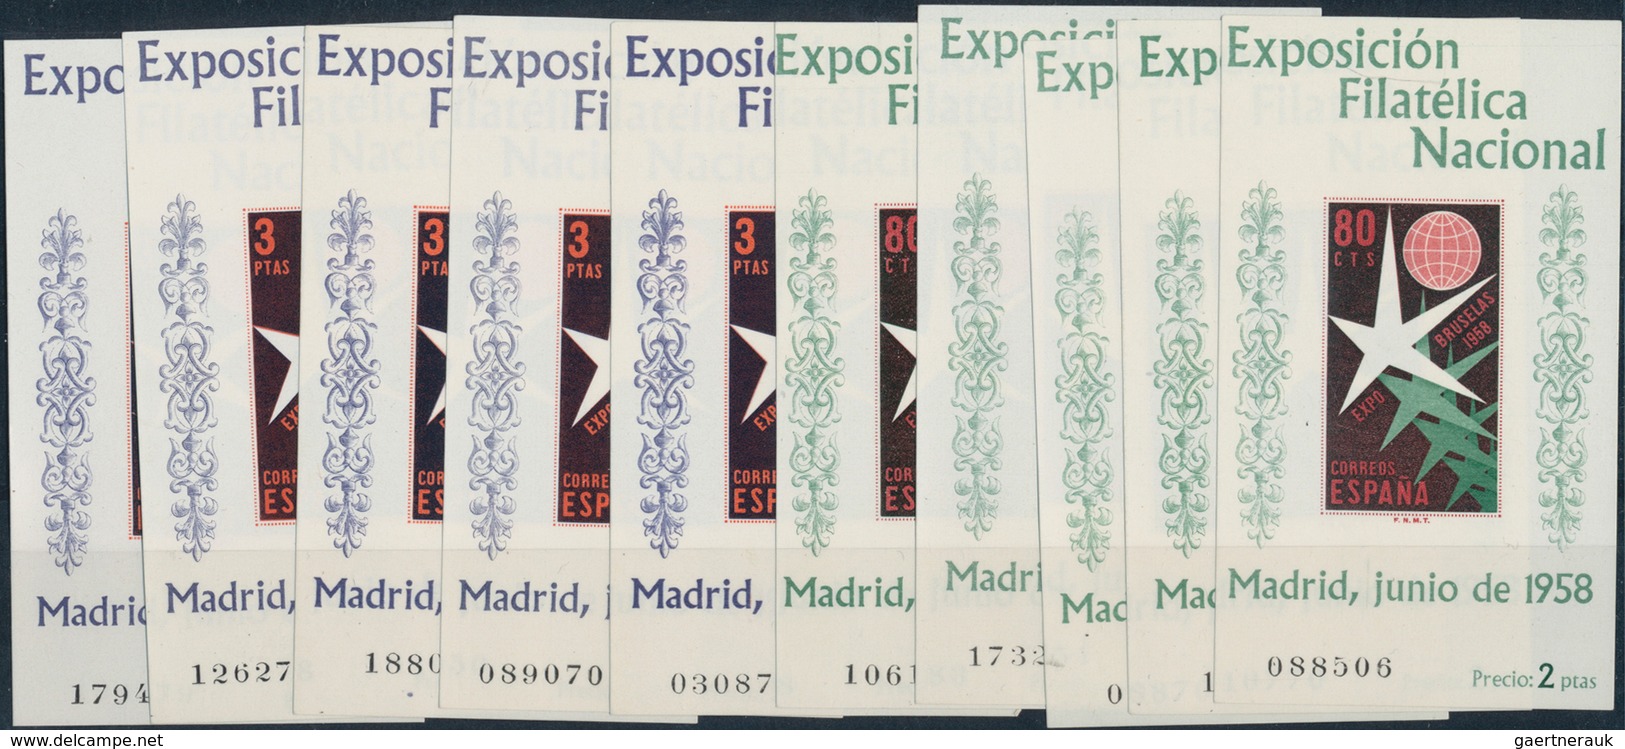 Spanien: 1938/1976 (ca.), extensive stock MNH on stockcards and in glasines sorted by years with man